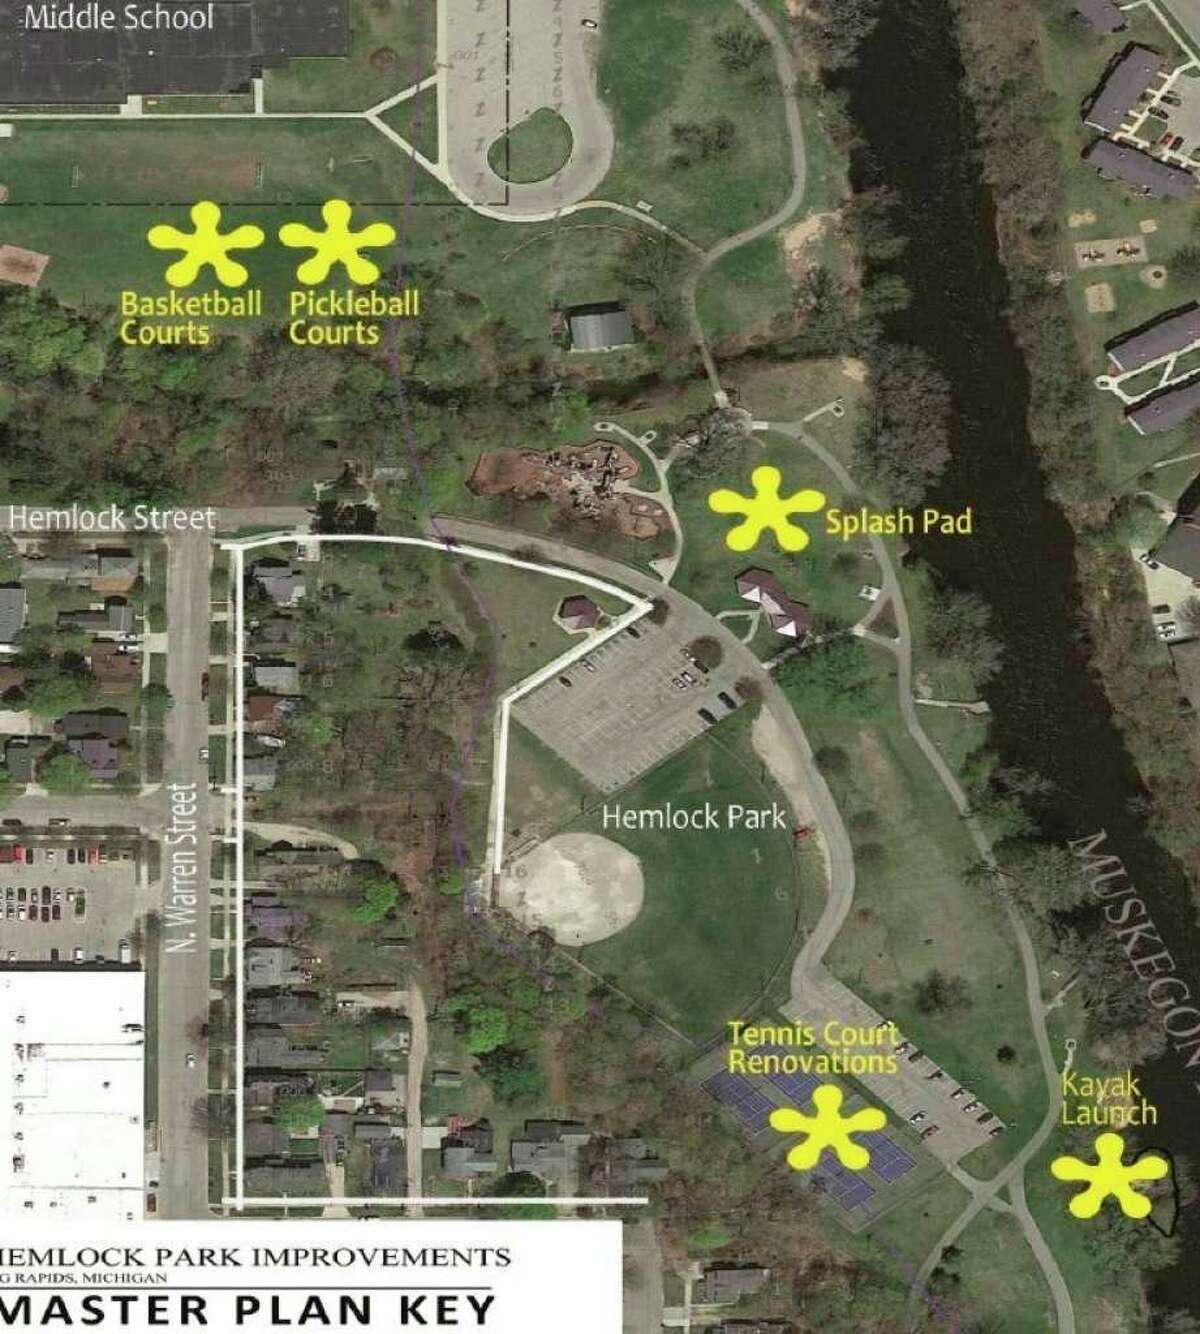 The Hemlock Park improvement plans include an ADA compliant kayak launch, renovated tennis courts and the addition of basketball and pickleball courts, as well as a Splash Pad. (Photo courtesy of Big Rapids parks committee)